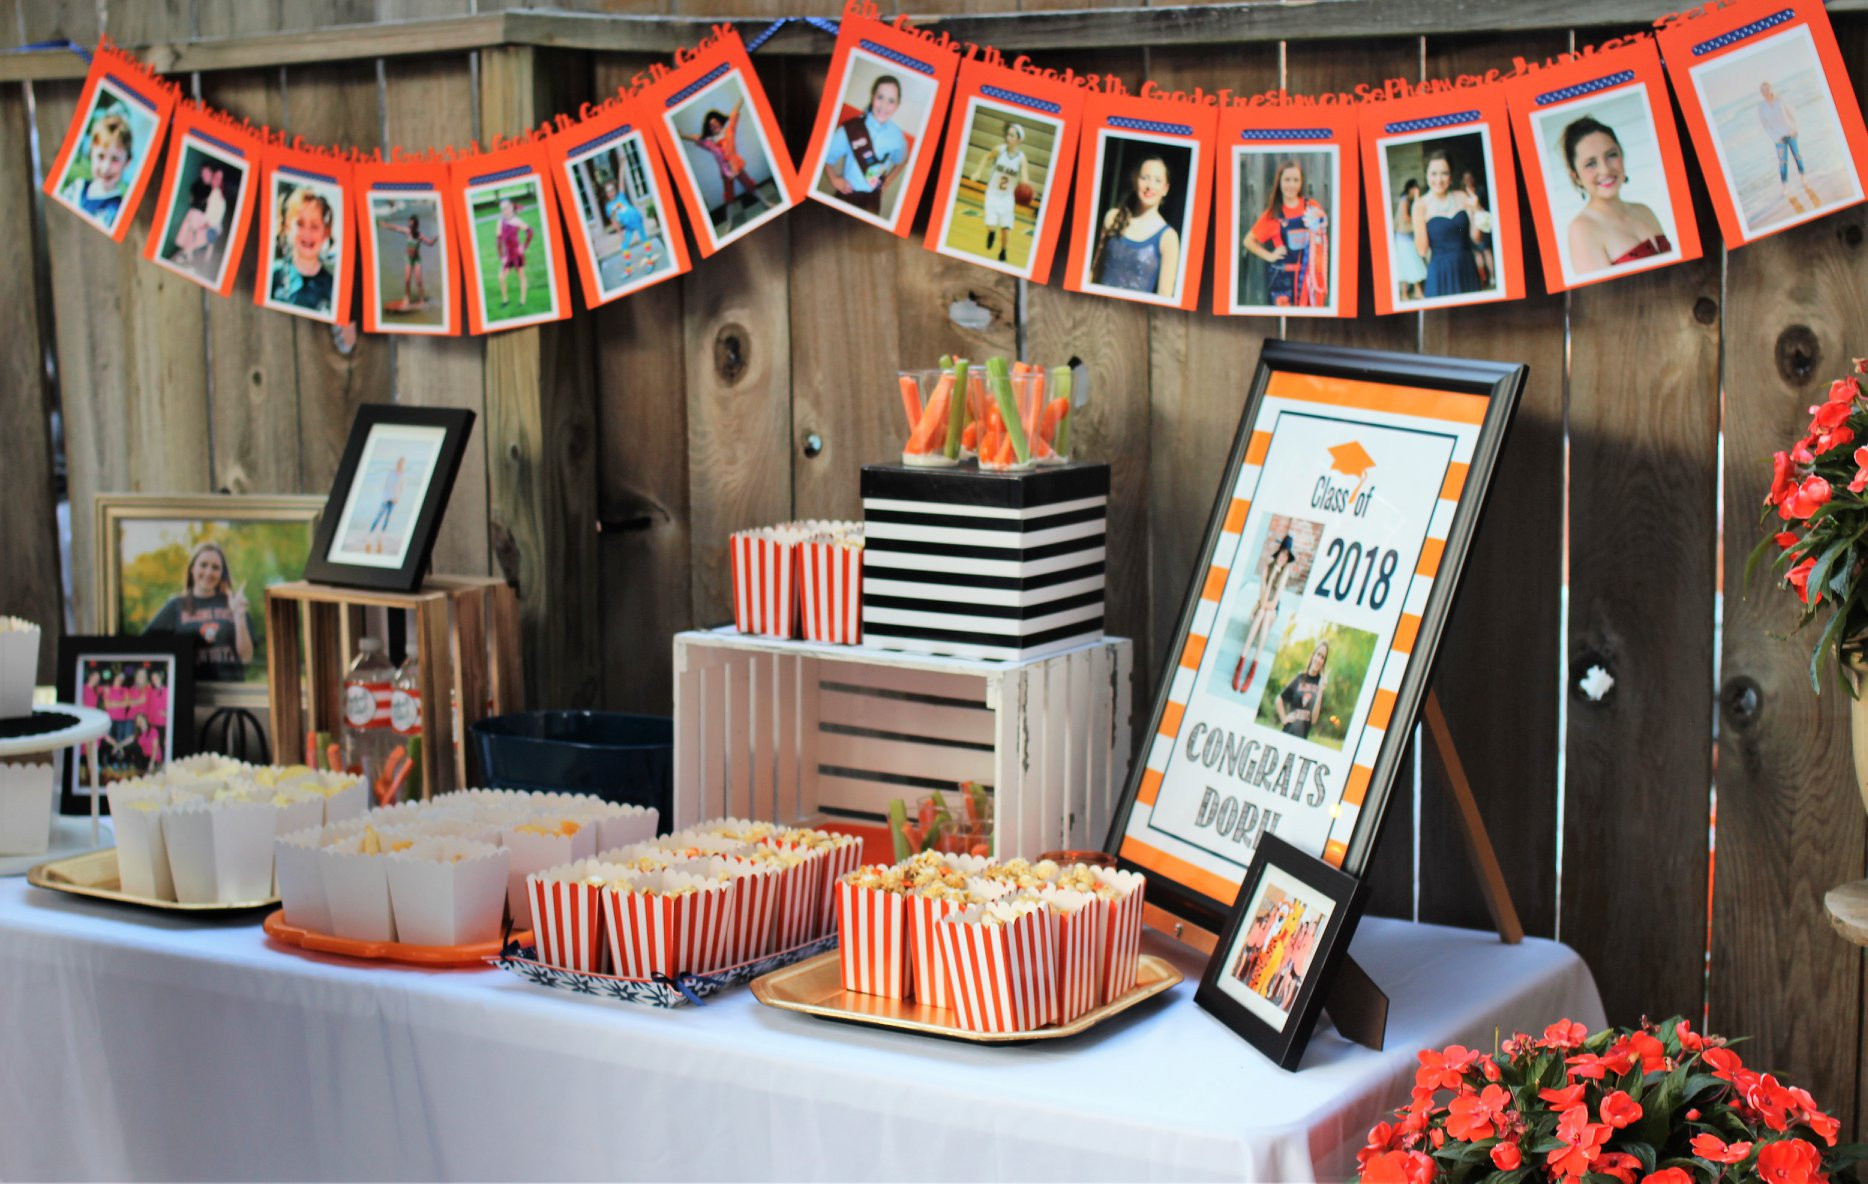 Ideas For Guys High School Graduation Party
 Graduation Party Ideas How to Celebrate Your Senior s Big Day